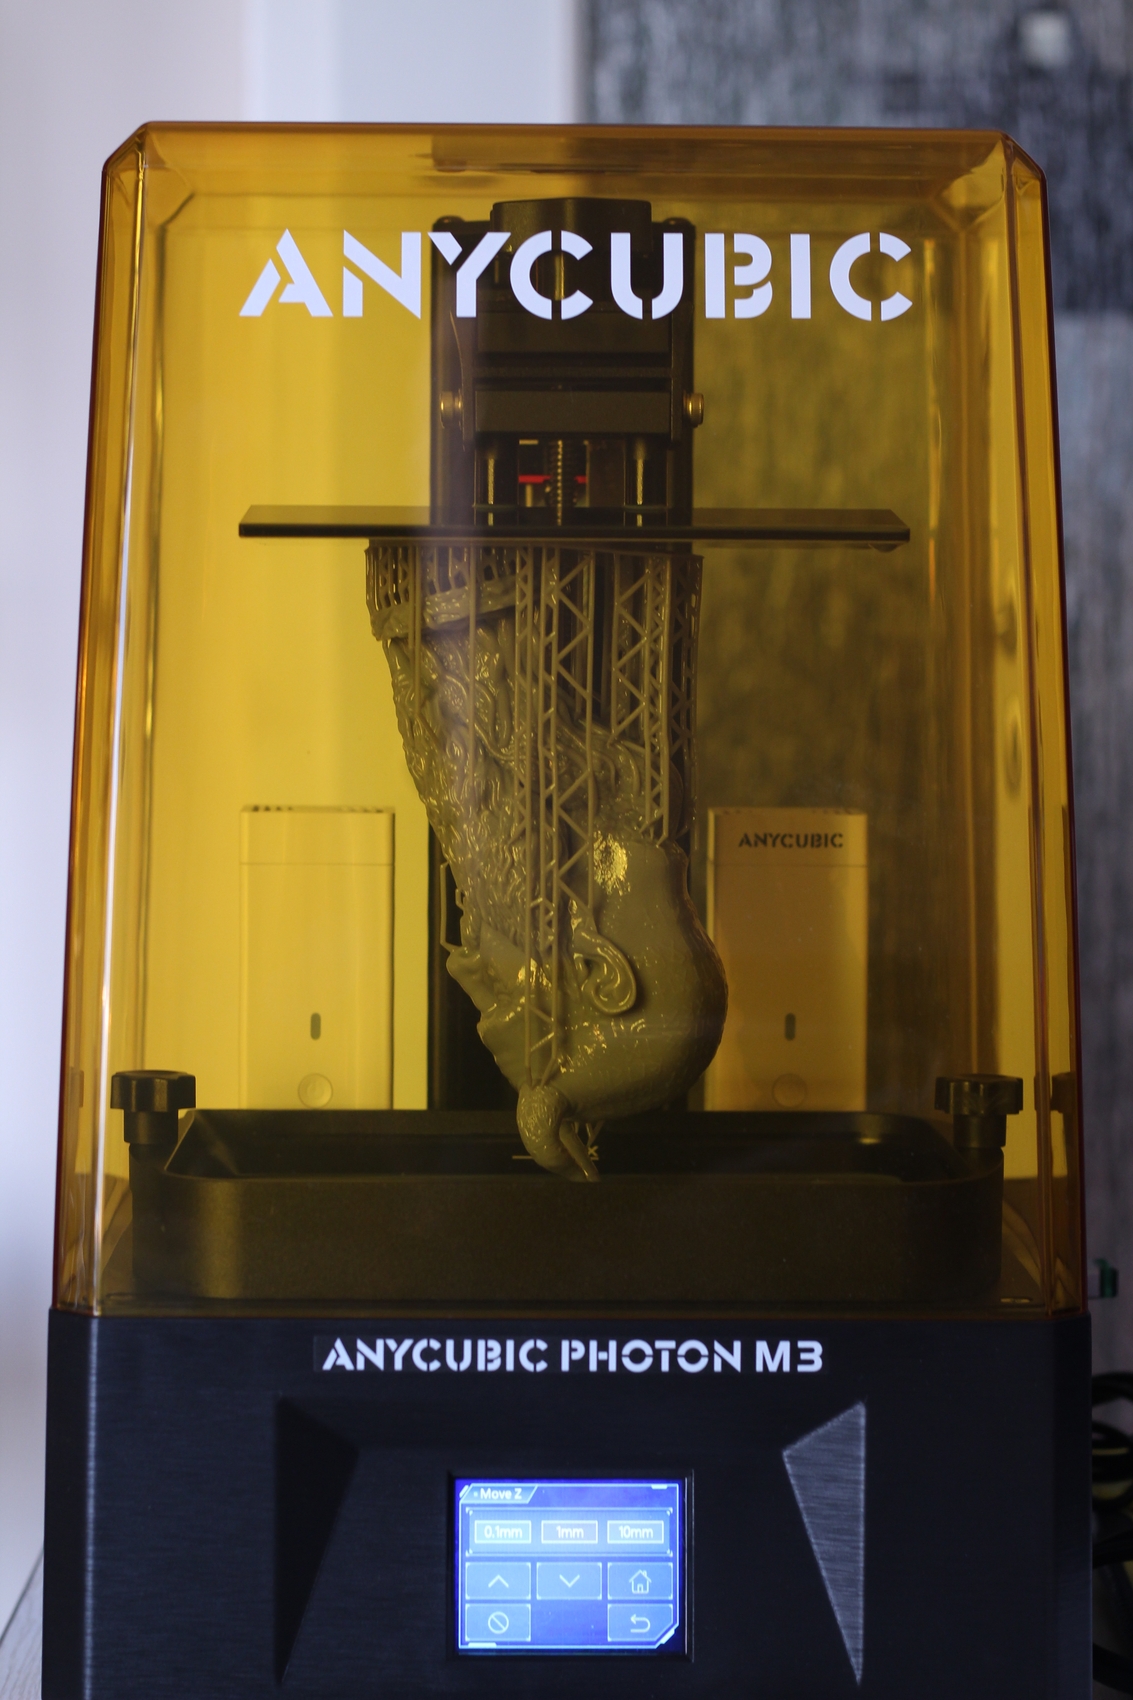 Anycubic Photon M3 Review Mimir bust from Fotis Mint | Anycubic Photon M3 Review: Bridging the gap